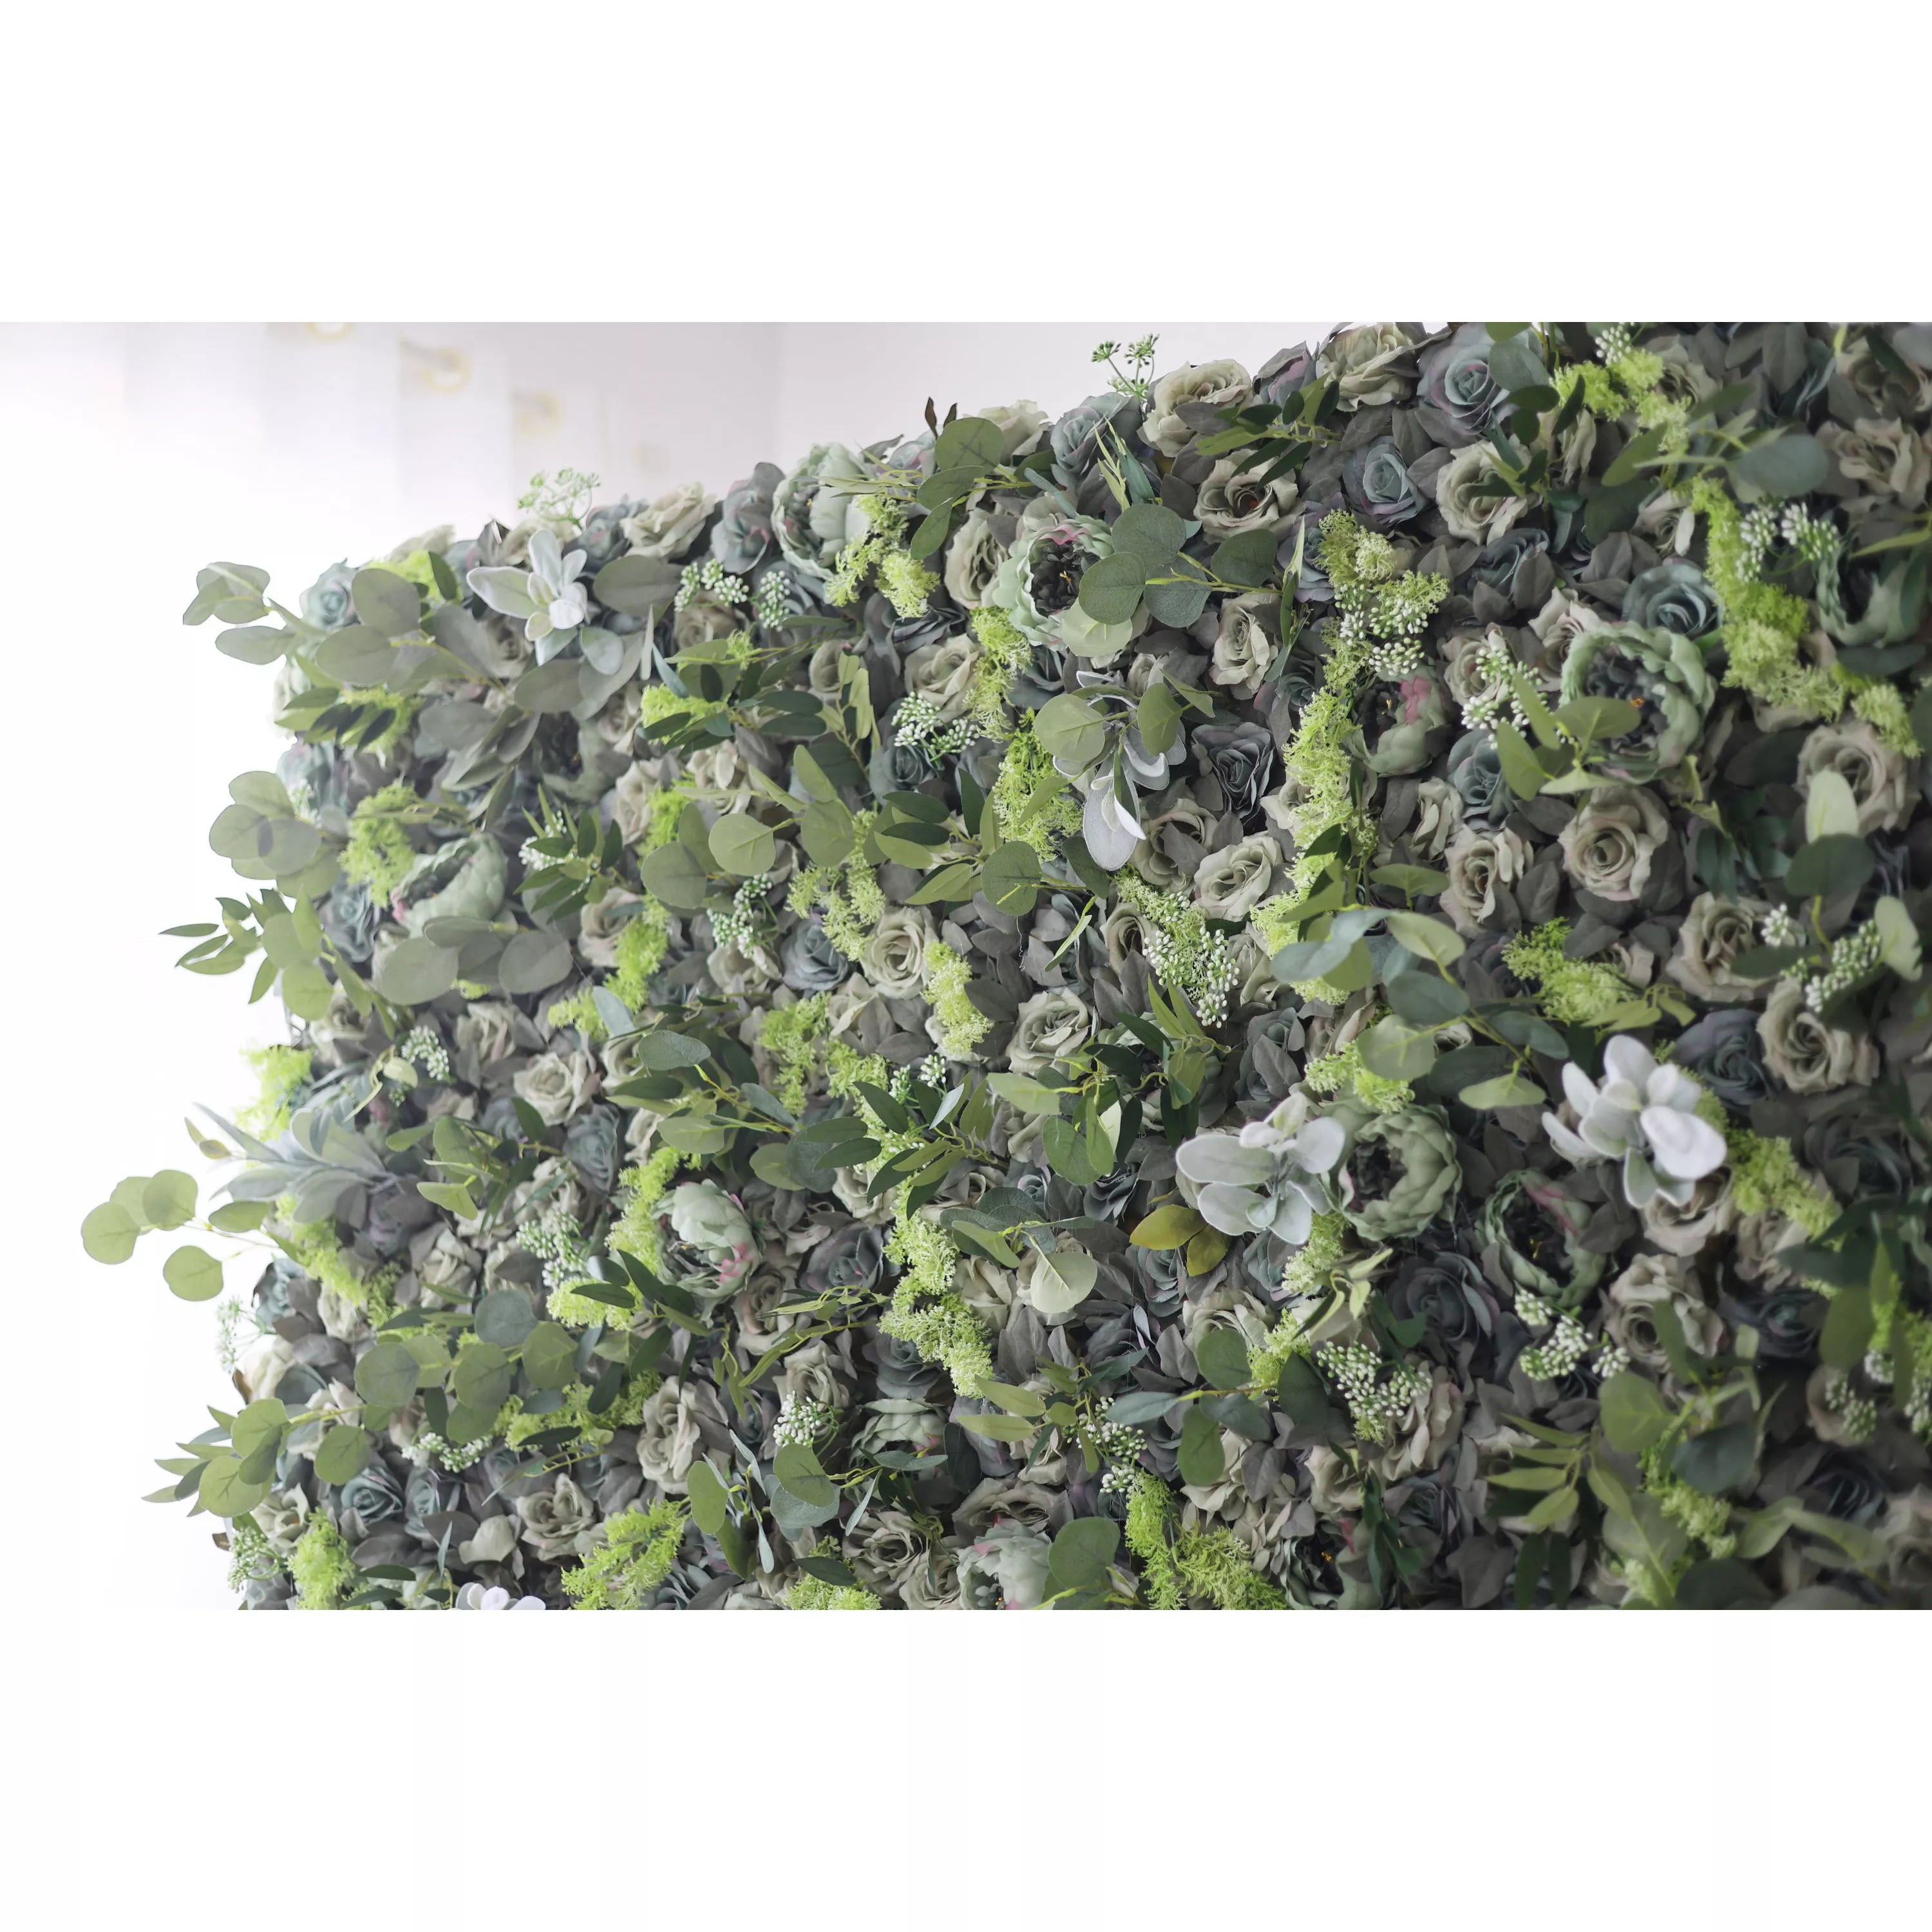 Valar Flowers Presents: Enchanted Forest – A Dense Mélange of Varied Greenery with Subtle White Accents – An Ideal Green Wall for Eco-Conscious Celebrations, Botanical Themes & Naturalistic Interior Designs-VF-222-3